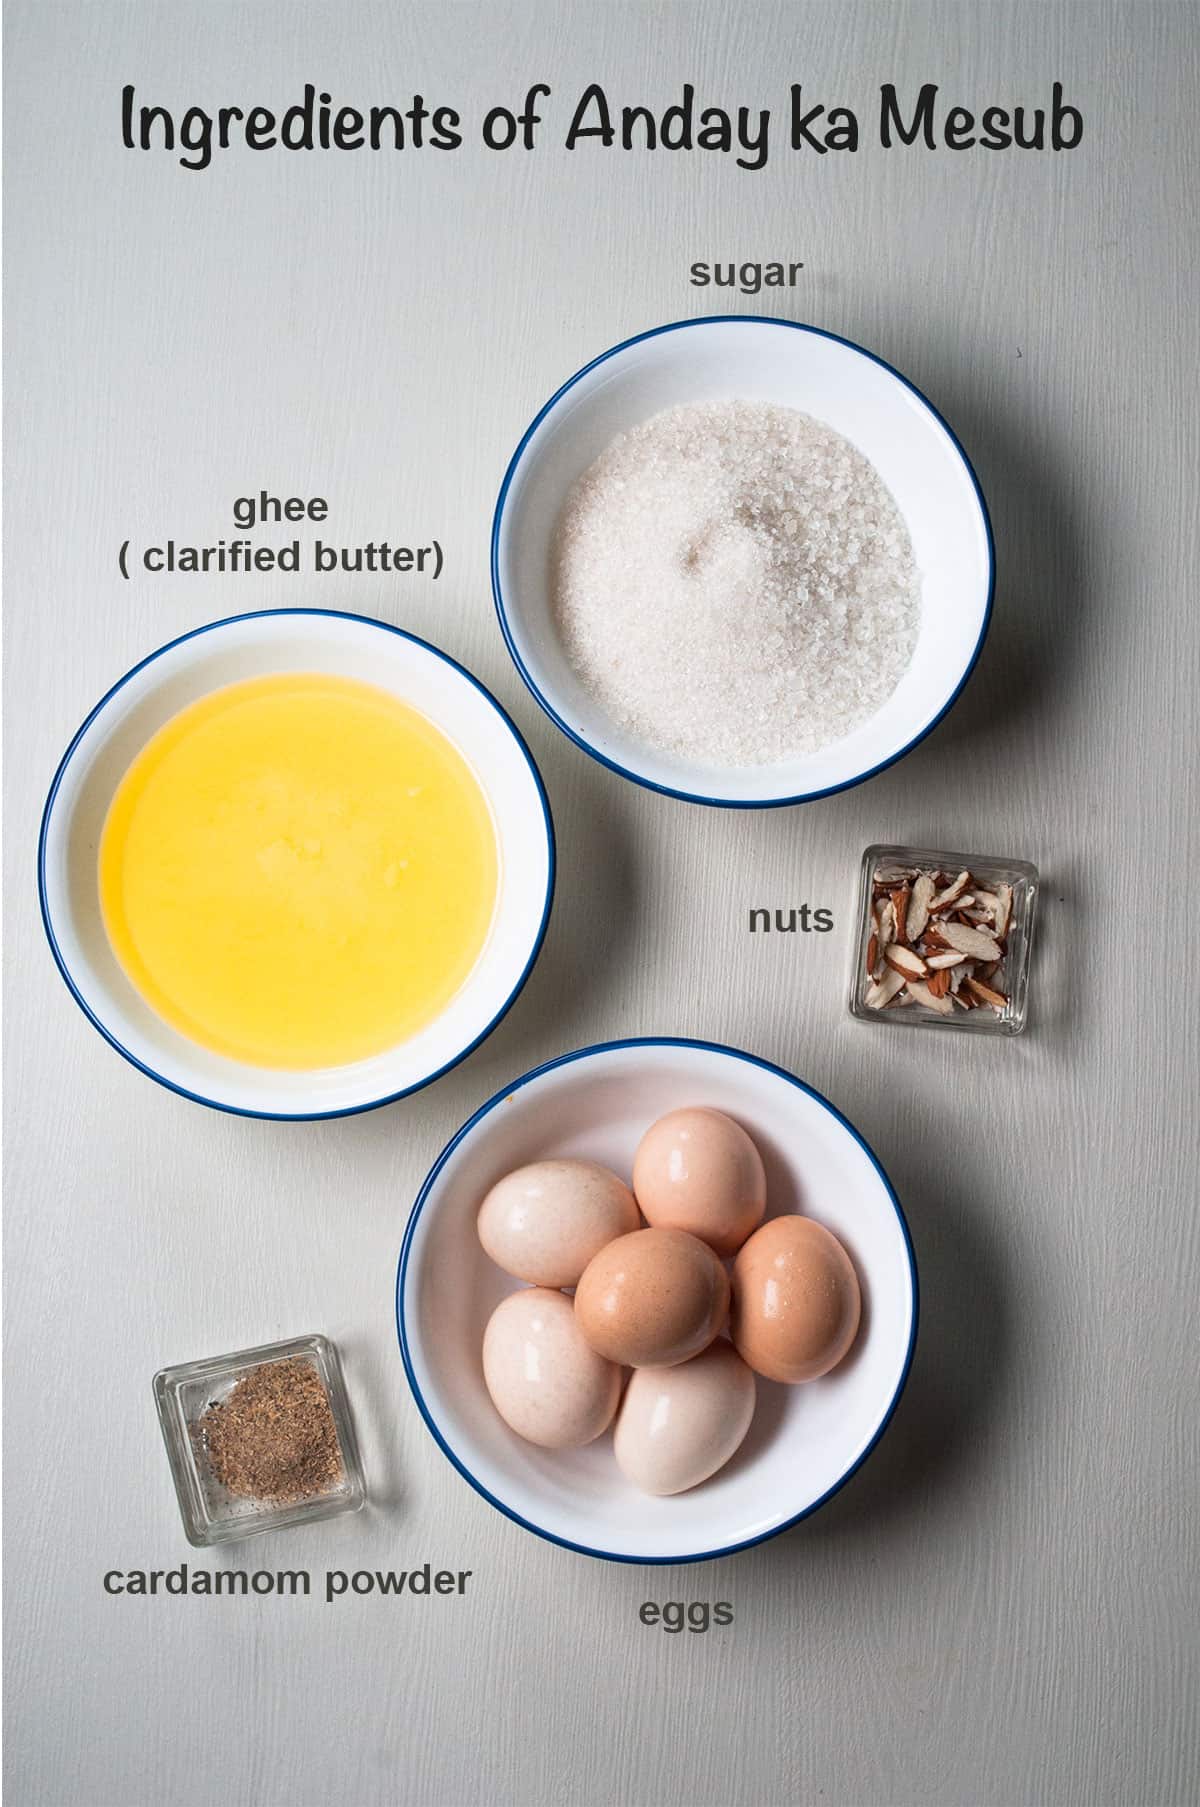 Ingredients of egg mesub on th white background.